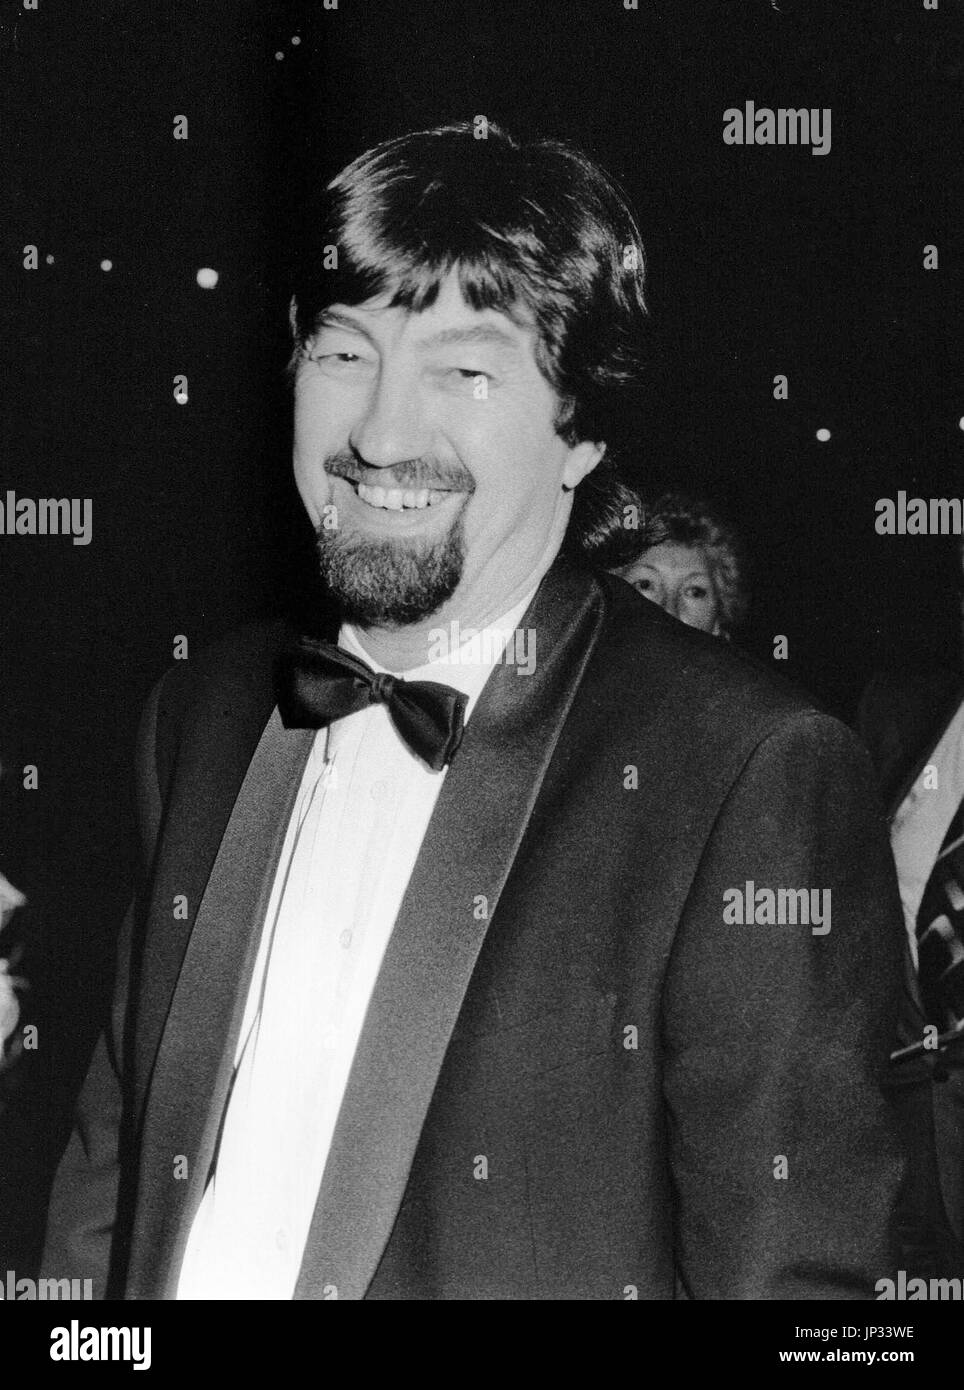 Sir Trevor Nunn, British stage director, attends a celebrity event in London, England on November 27, 1989. Stock Photo